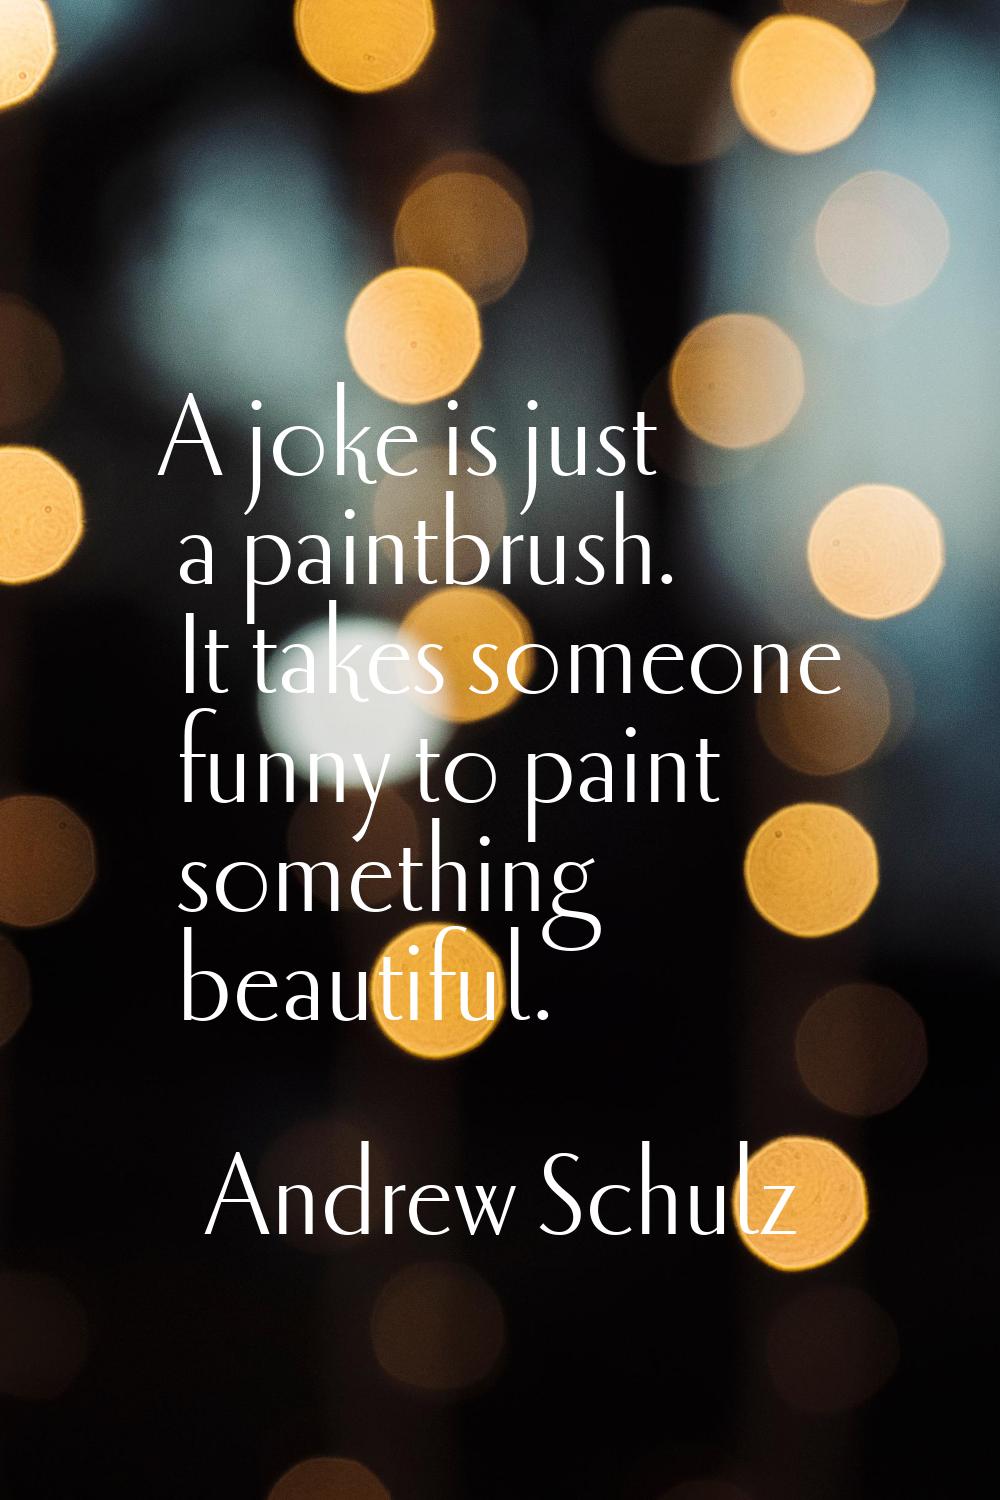 A joke is just a paintbrush. It takes someone funny to paint something beautiful.